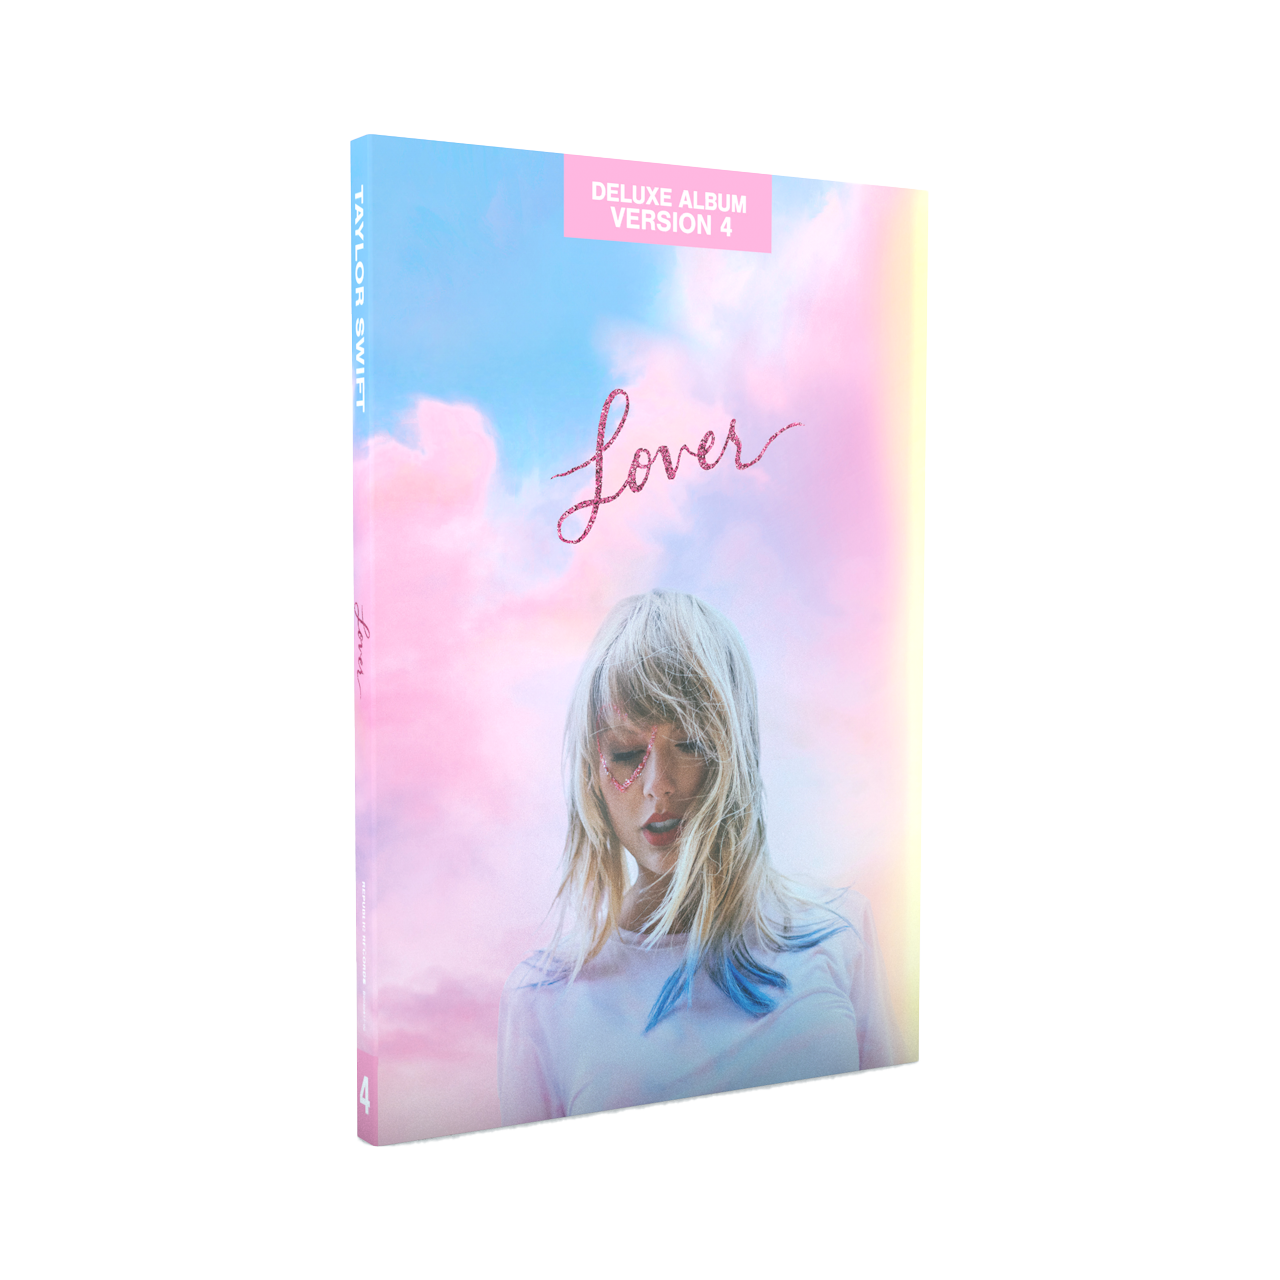 Lover CD Deluxe Version 4 - Taylor Swift Official Store